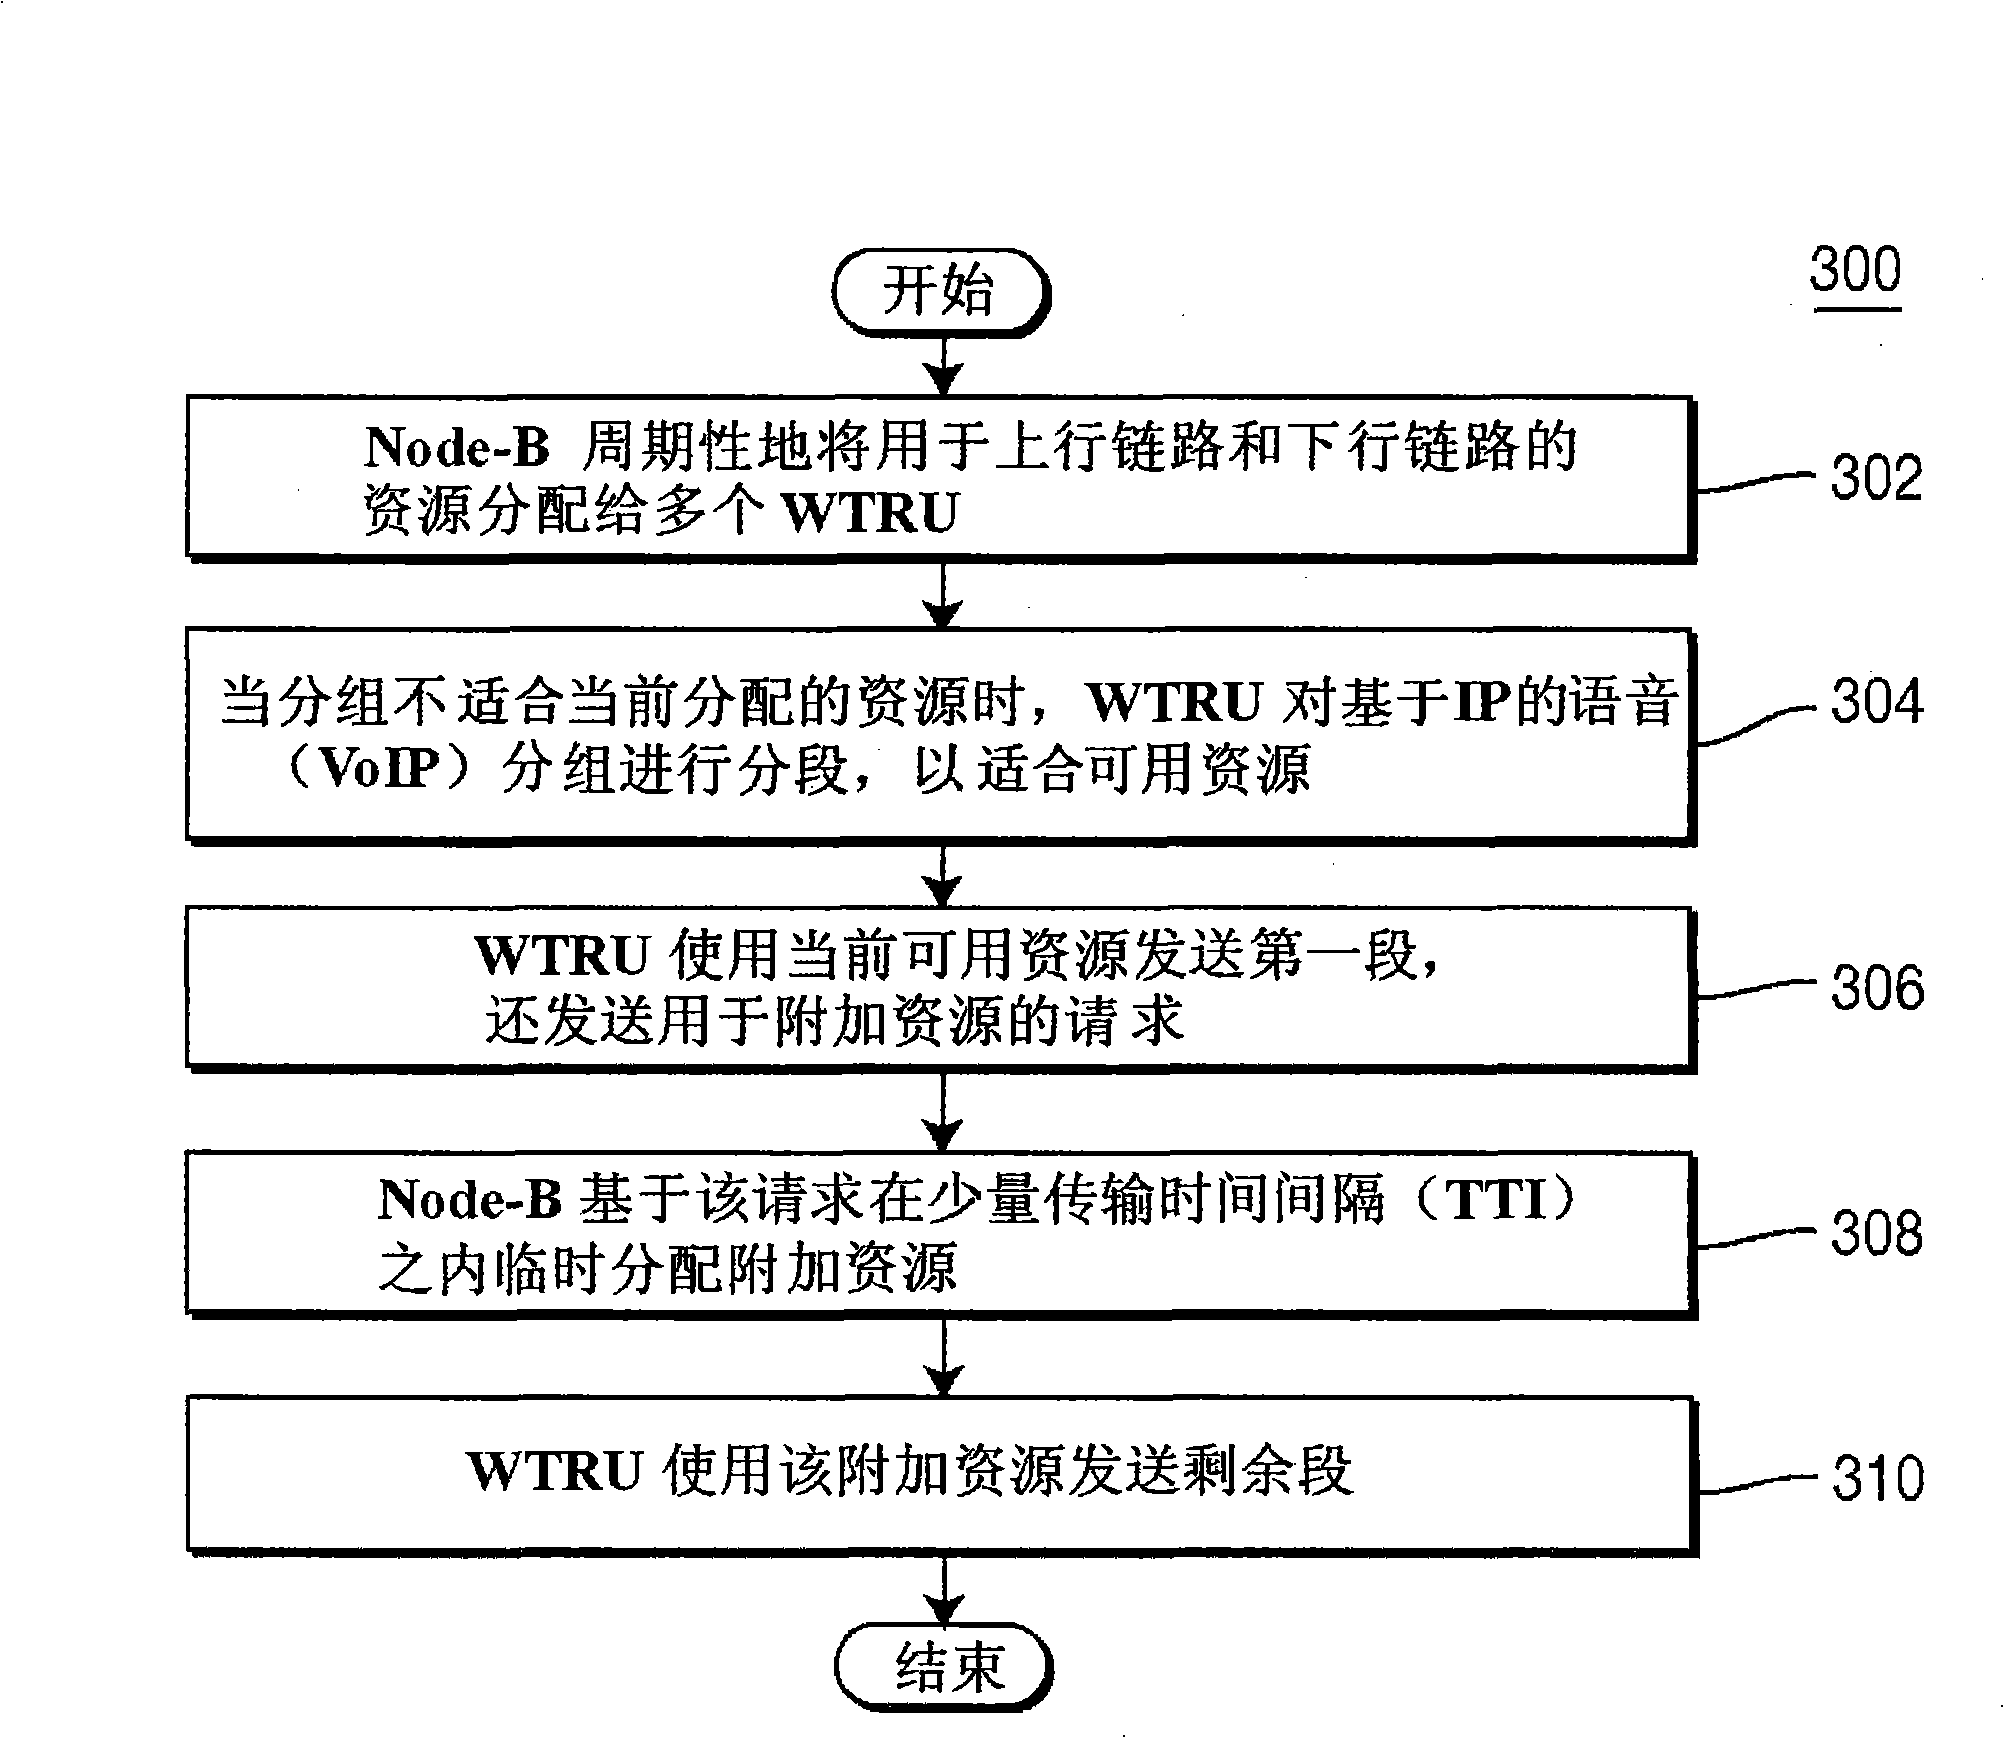 Method and apparatus for supporting voice over ip services over a cellular wireless communication network